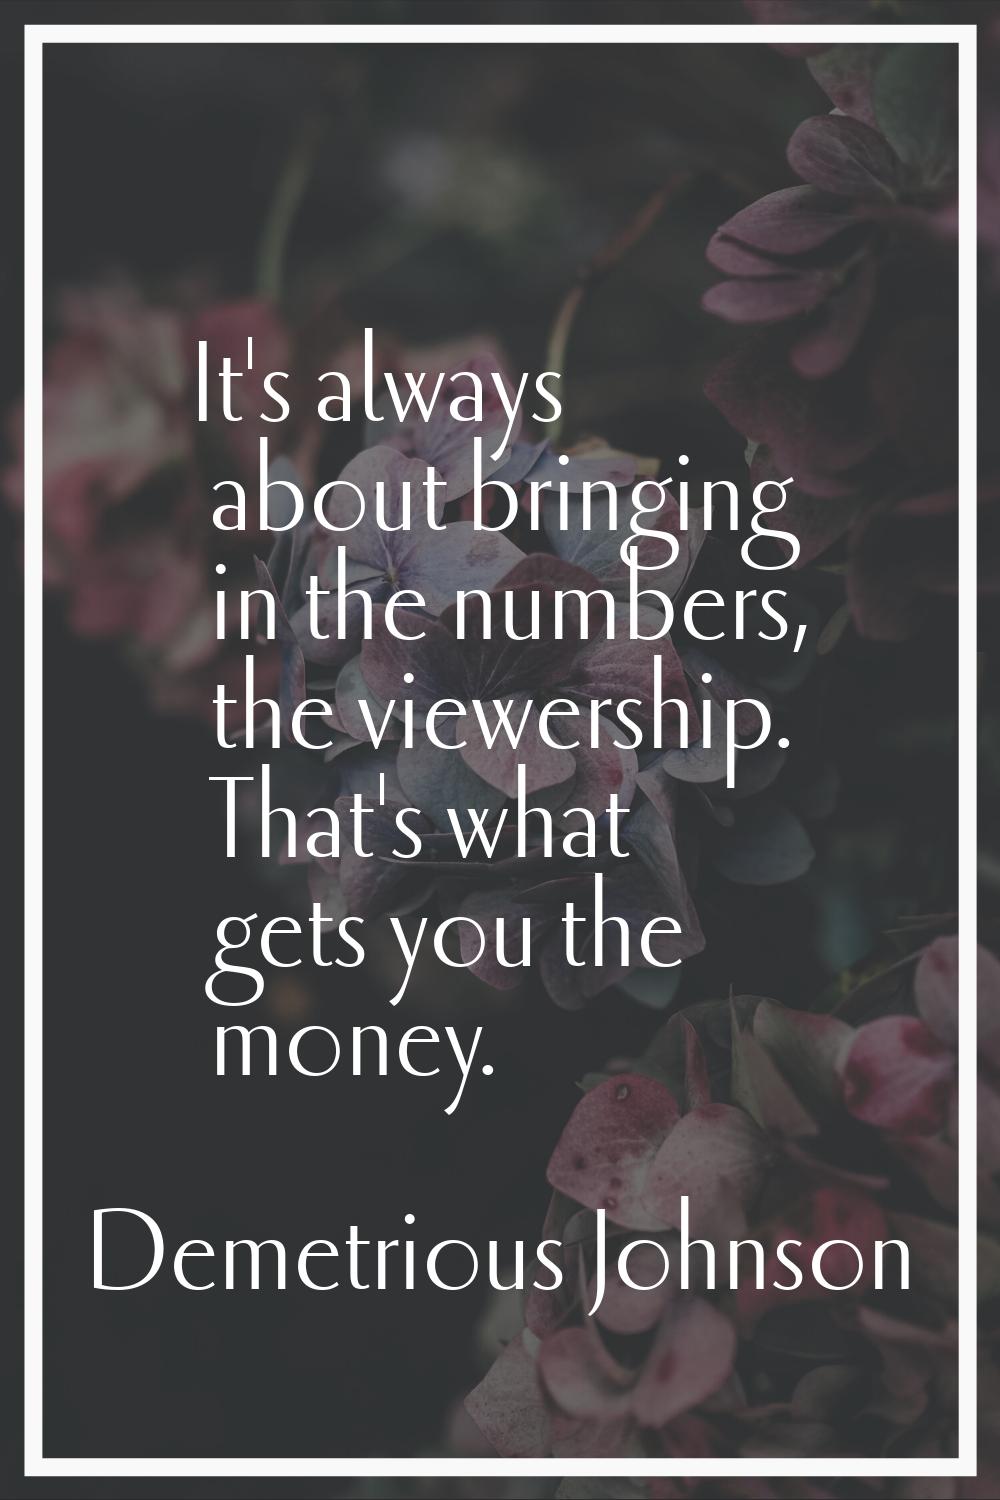 It's always about bringing in the numbers, the viewership. That's what gets you the money.